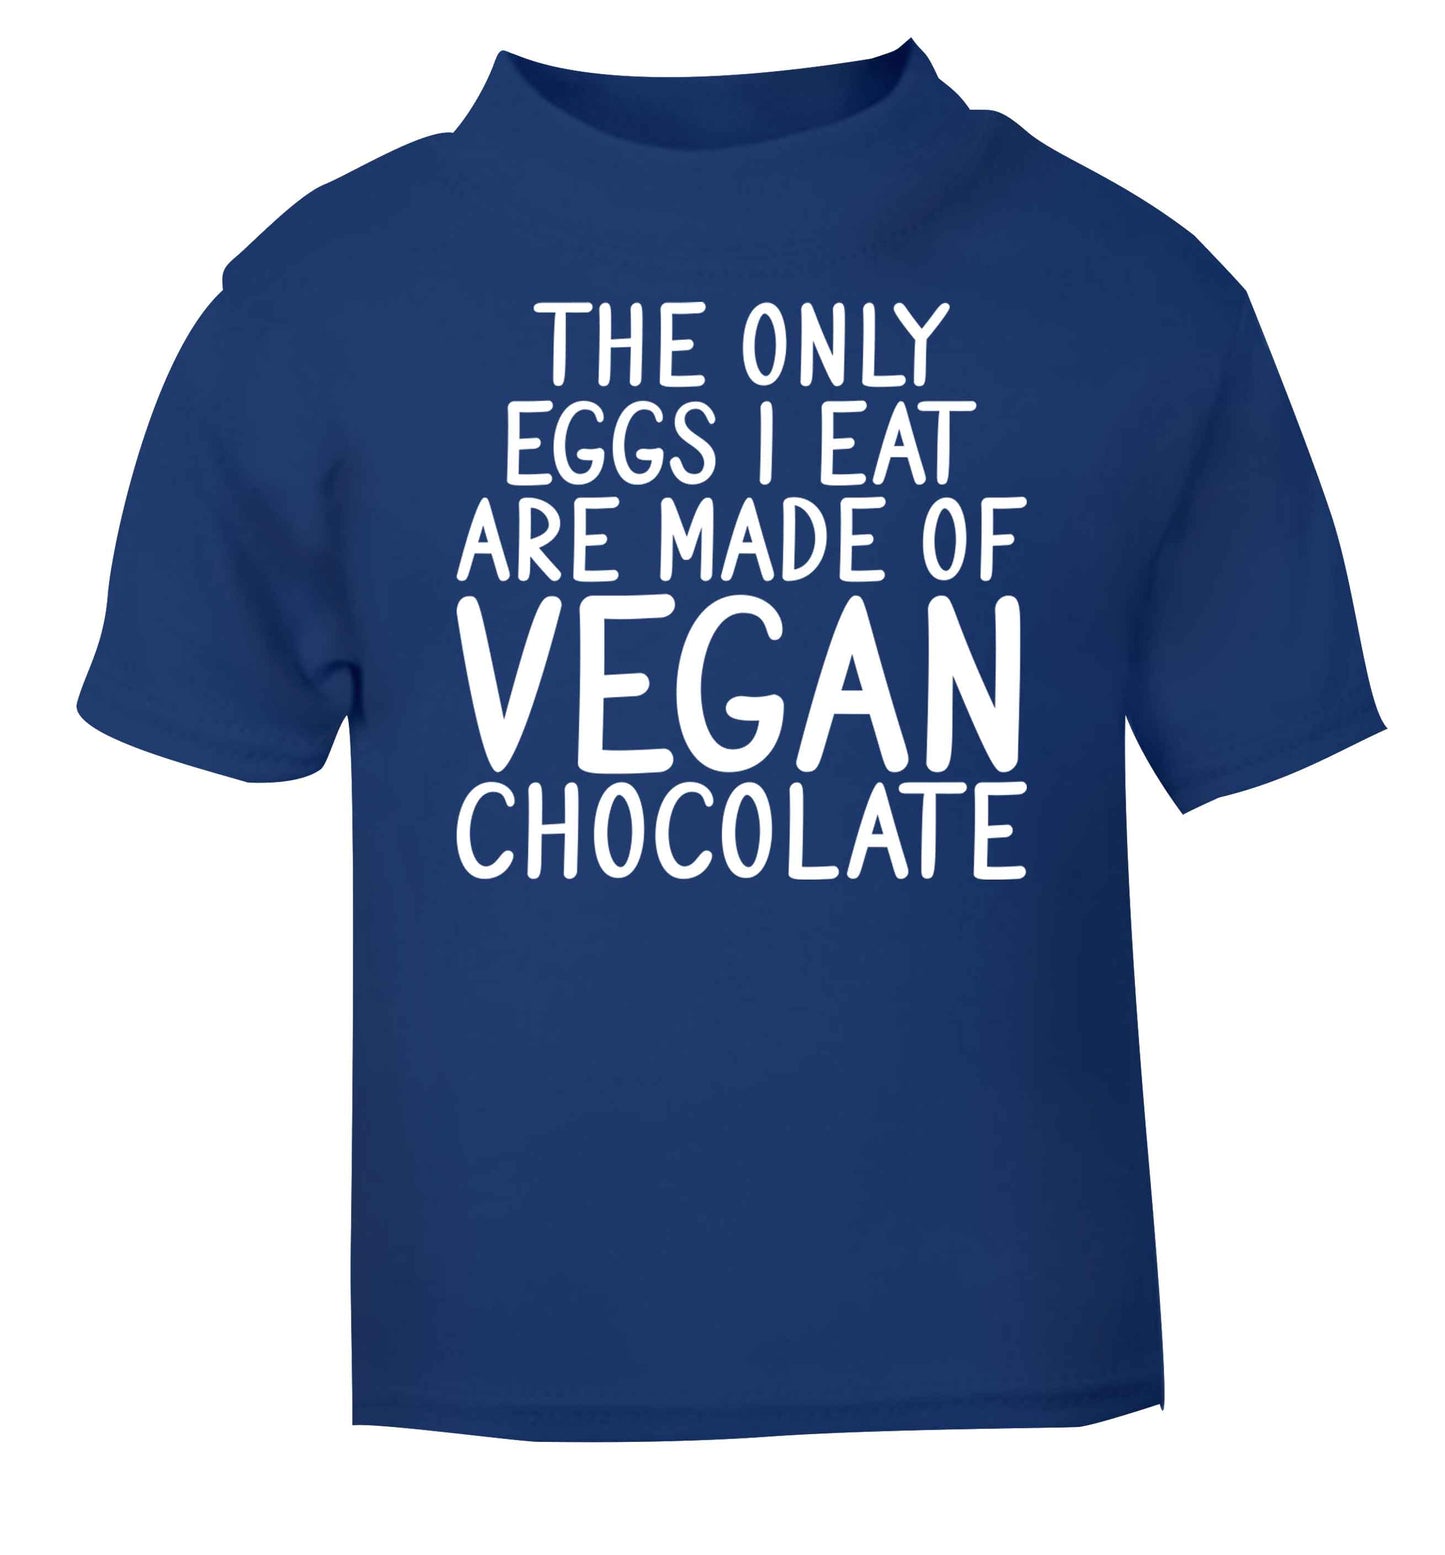 The only eggs I eat are made of vegan chocolate blue baby toddler Tshirt 2 Years